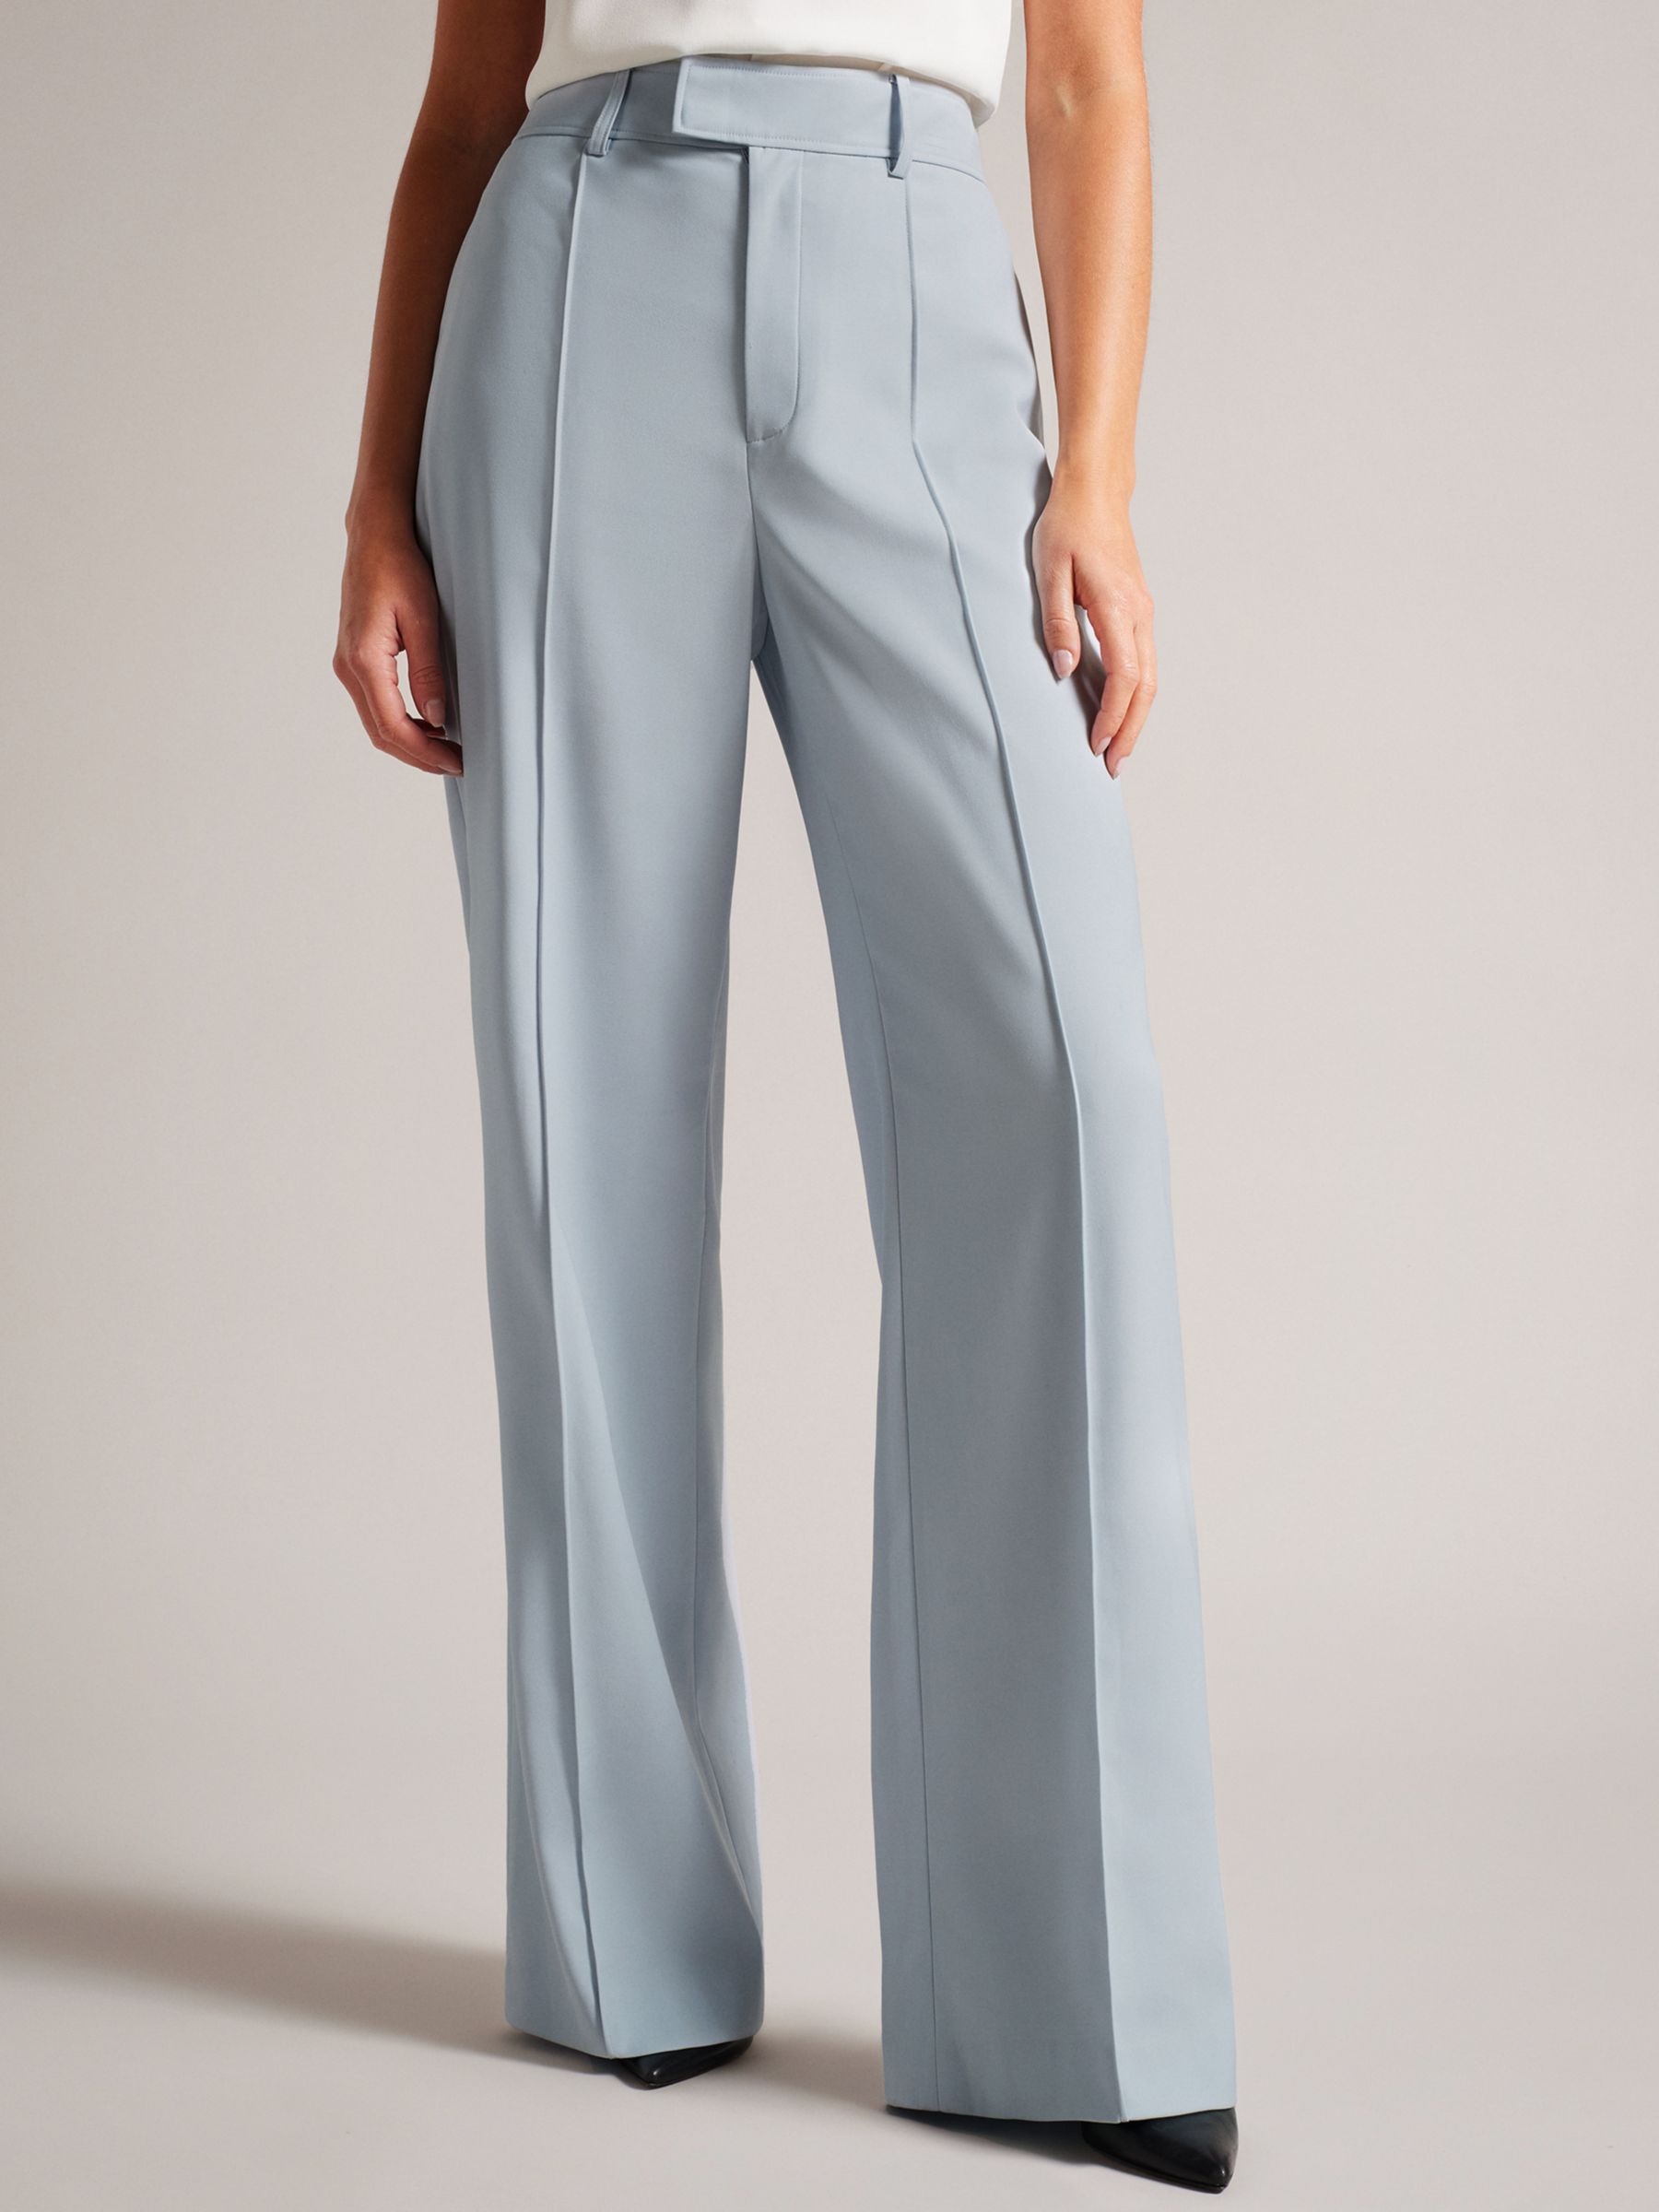 Ted Baker Hildiat Wide Leg Trousers, Baby Blue, 6